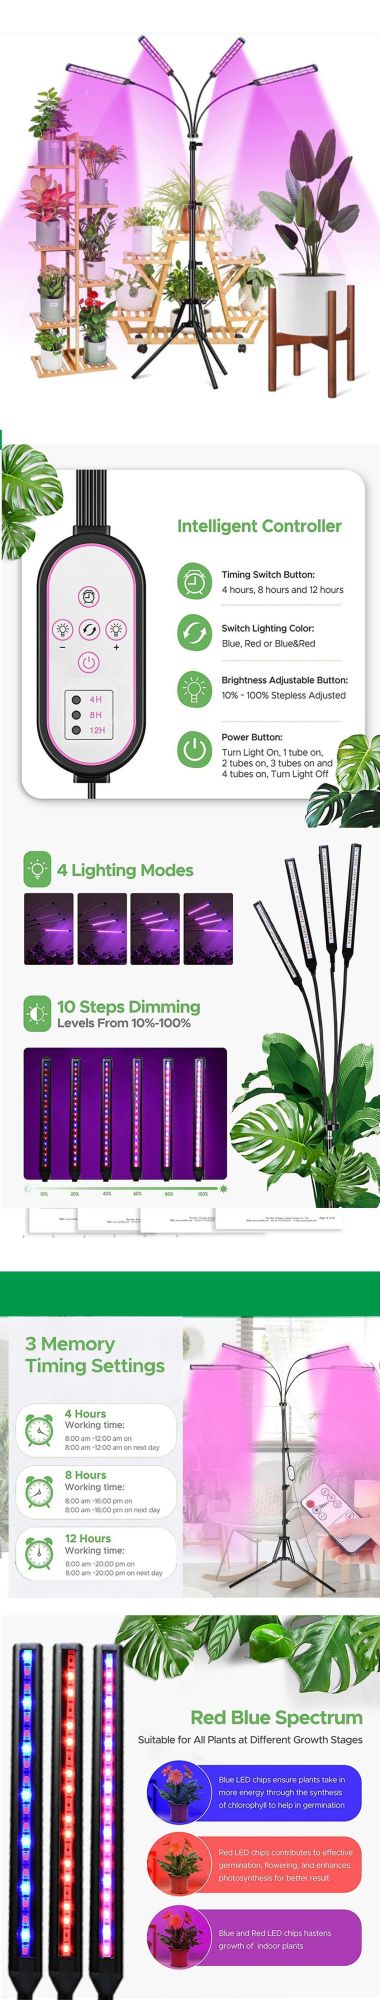 Remoted Waterproof Full Spectrum LED Grow Light Tube with Intelligent Controller for Greenhouse